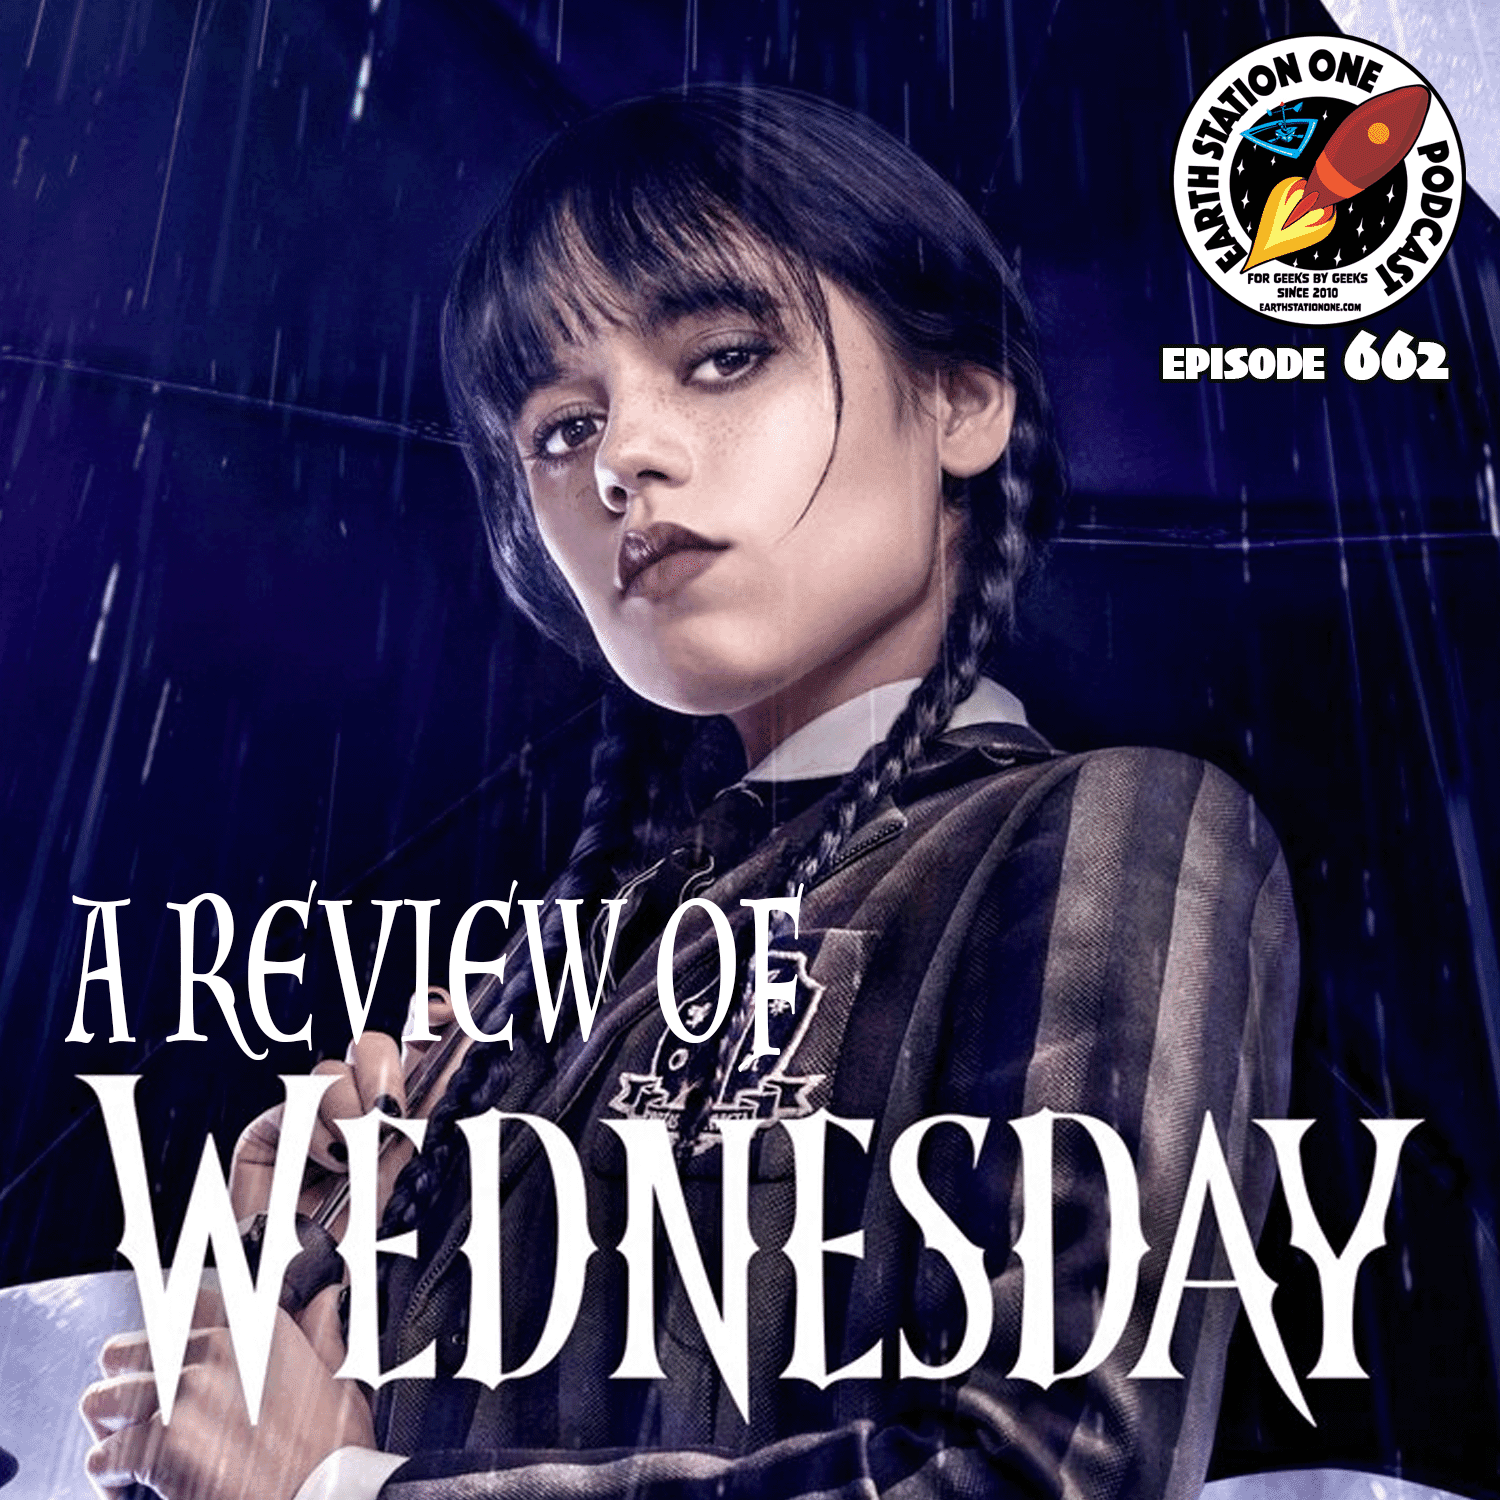 Earth Station One Ep 662 - A Review of Wednesday